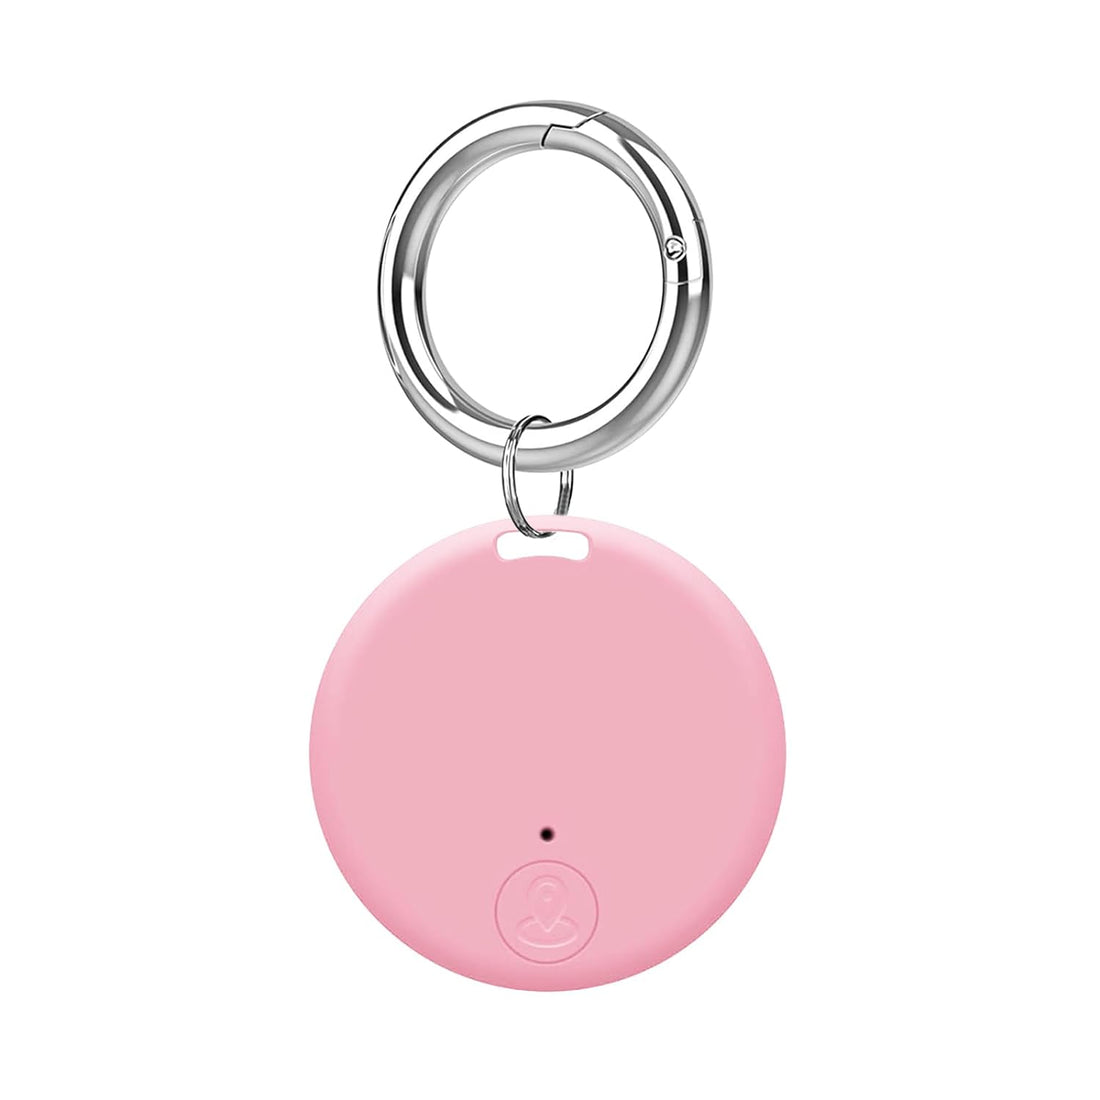 Aircawin Mini GPS Tracker C, Key Item Finder Locator,No Monthly Fee App for iOS/Android 2023 Latest,Portable Anti-Lost Bluetooth Tag Item Tracker for Luggages/Kids/Pets/Phone/Wallet/Bag-1Pcs-Pink